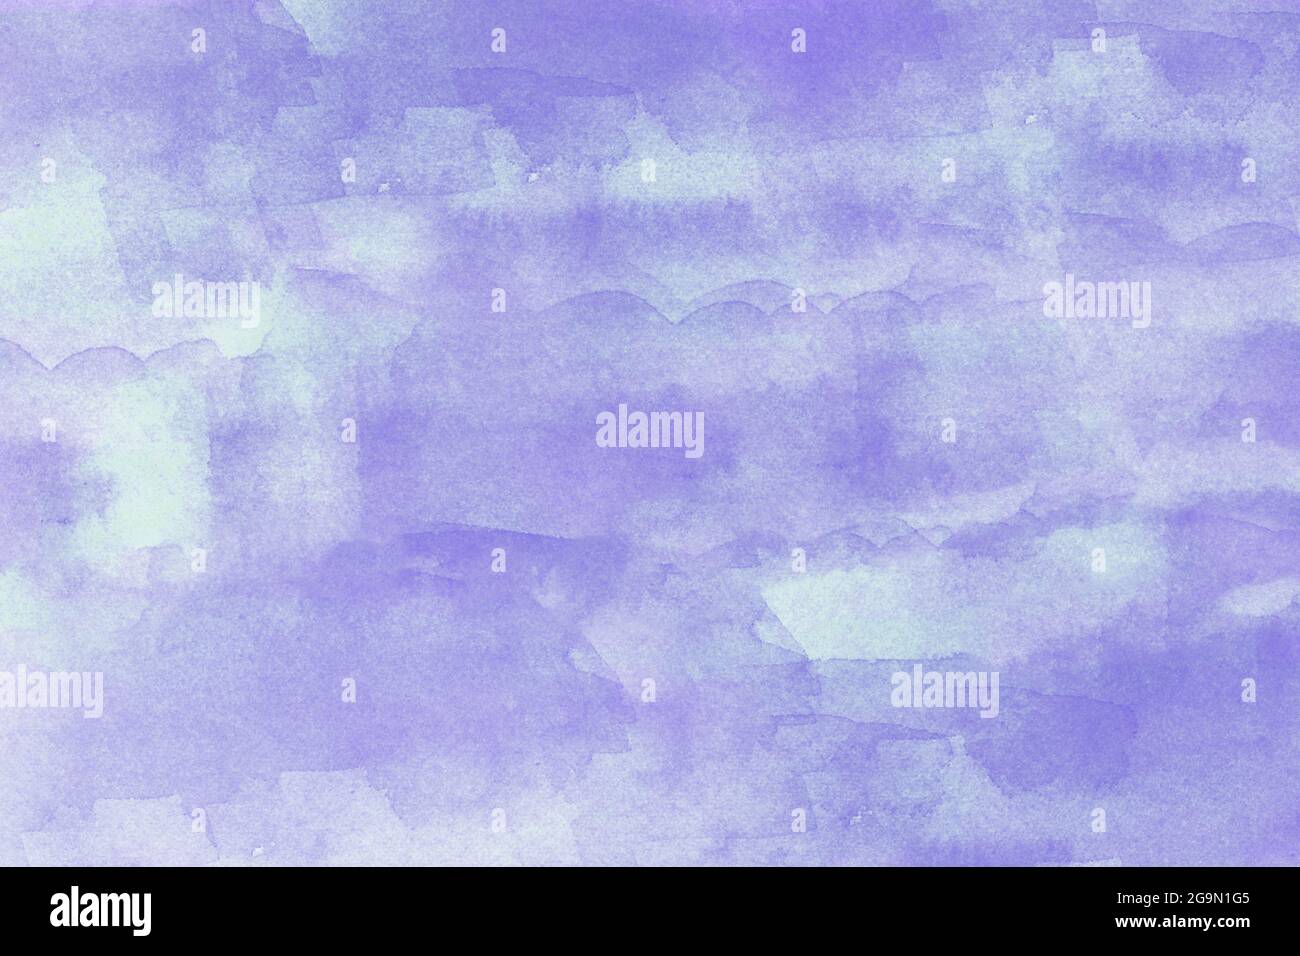 Abstract purple watercolor background Stock Photo